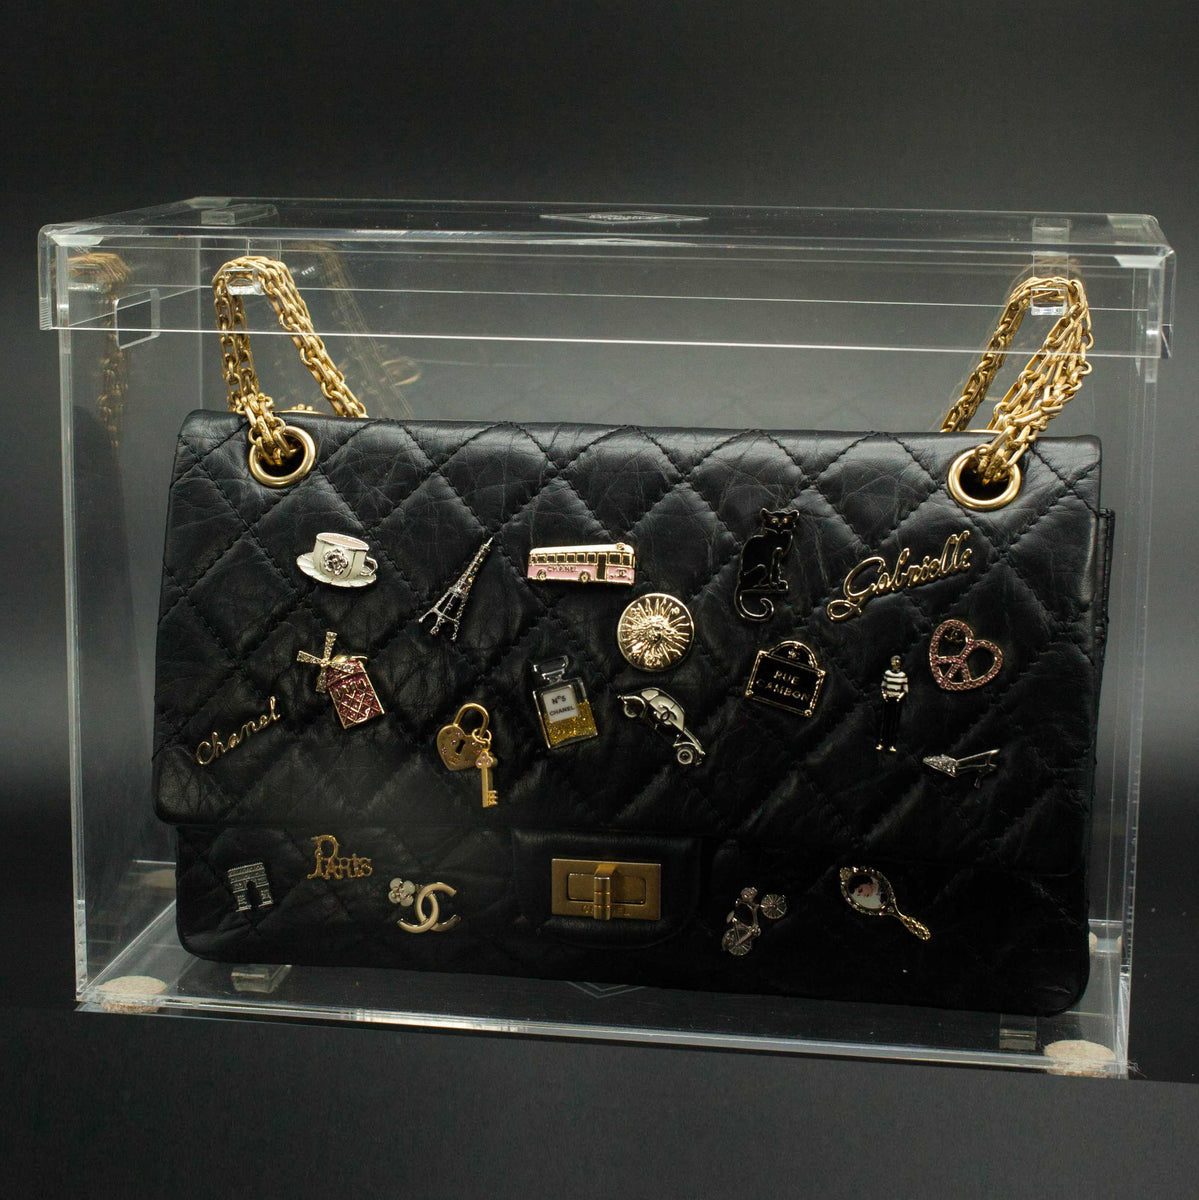 chanel grocery store bag holder